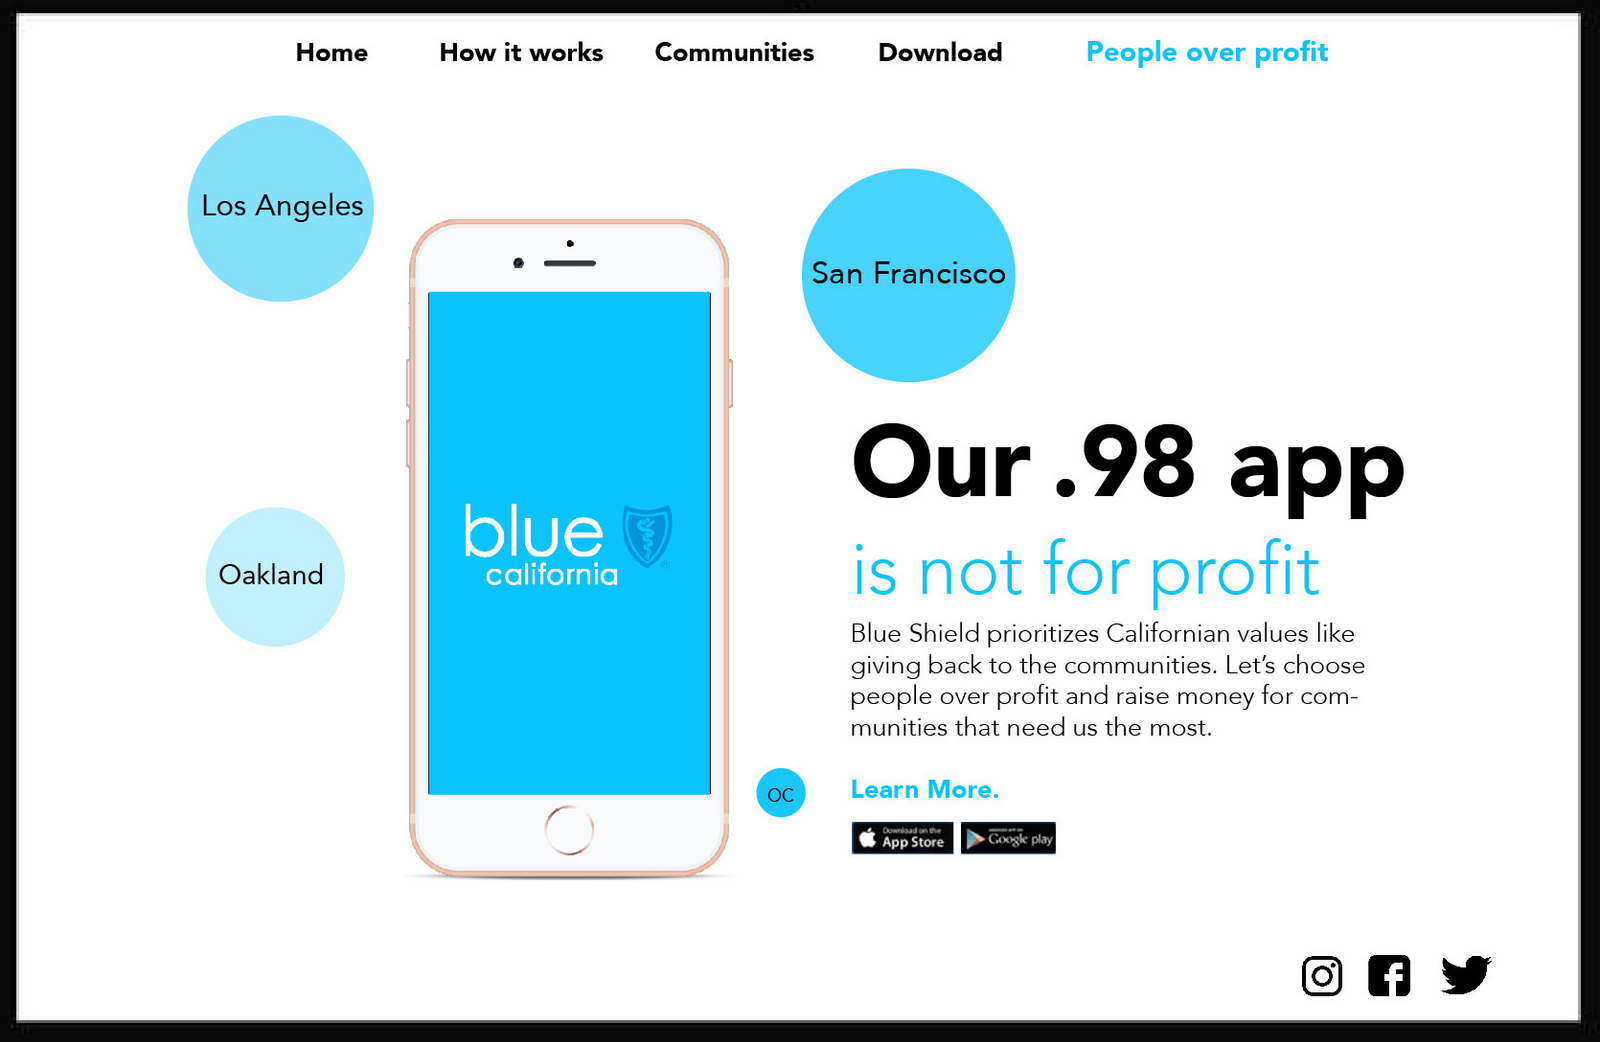 When people who have Blue Shield Insurance download the app for 98 cents, in LA or SF, they give back to their community.   That 98 cents help non-insured Californians to receive insurance.